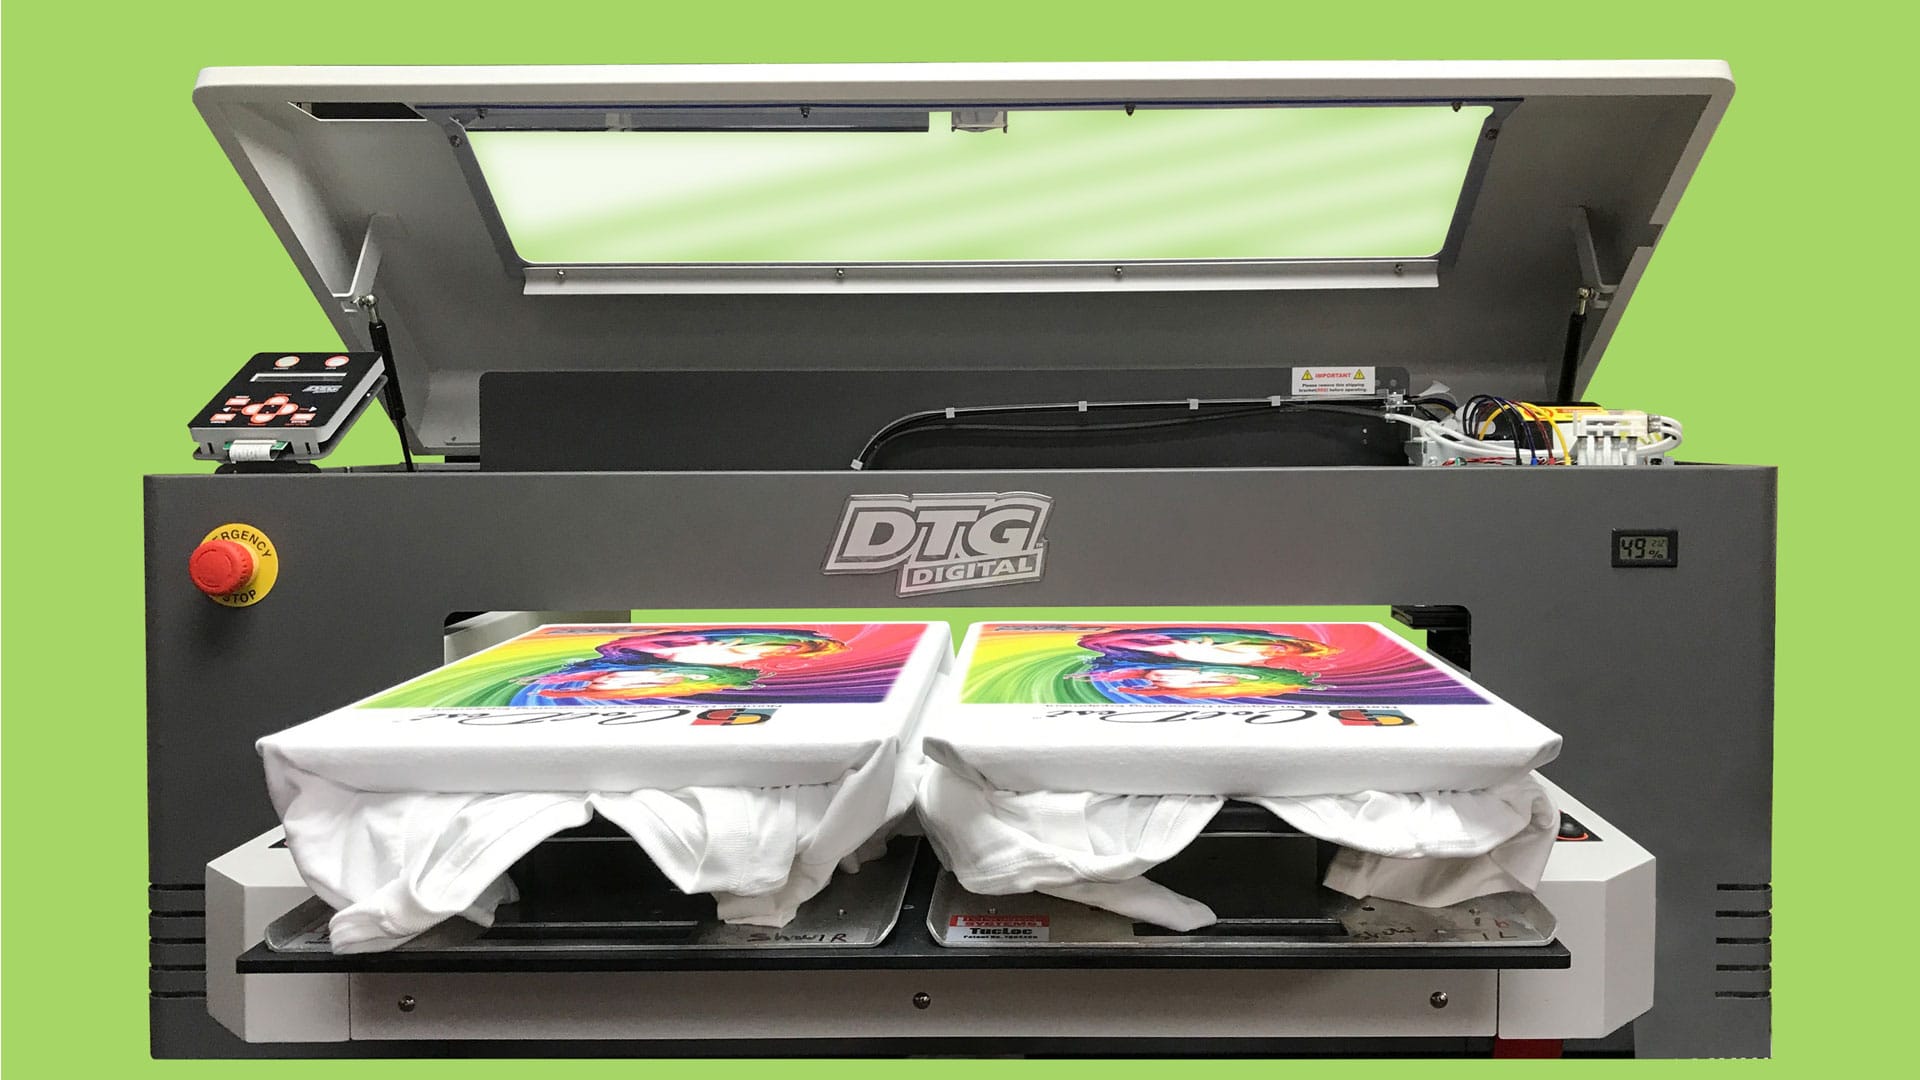 DTG Digital Printer by Coldesi with two shirts loaded and printed on